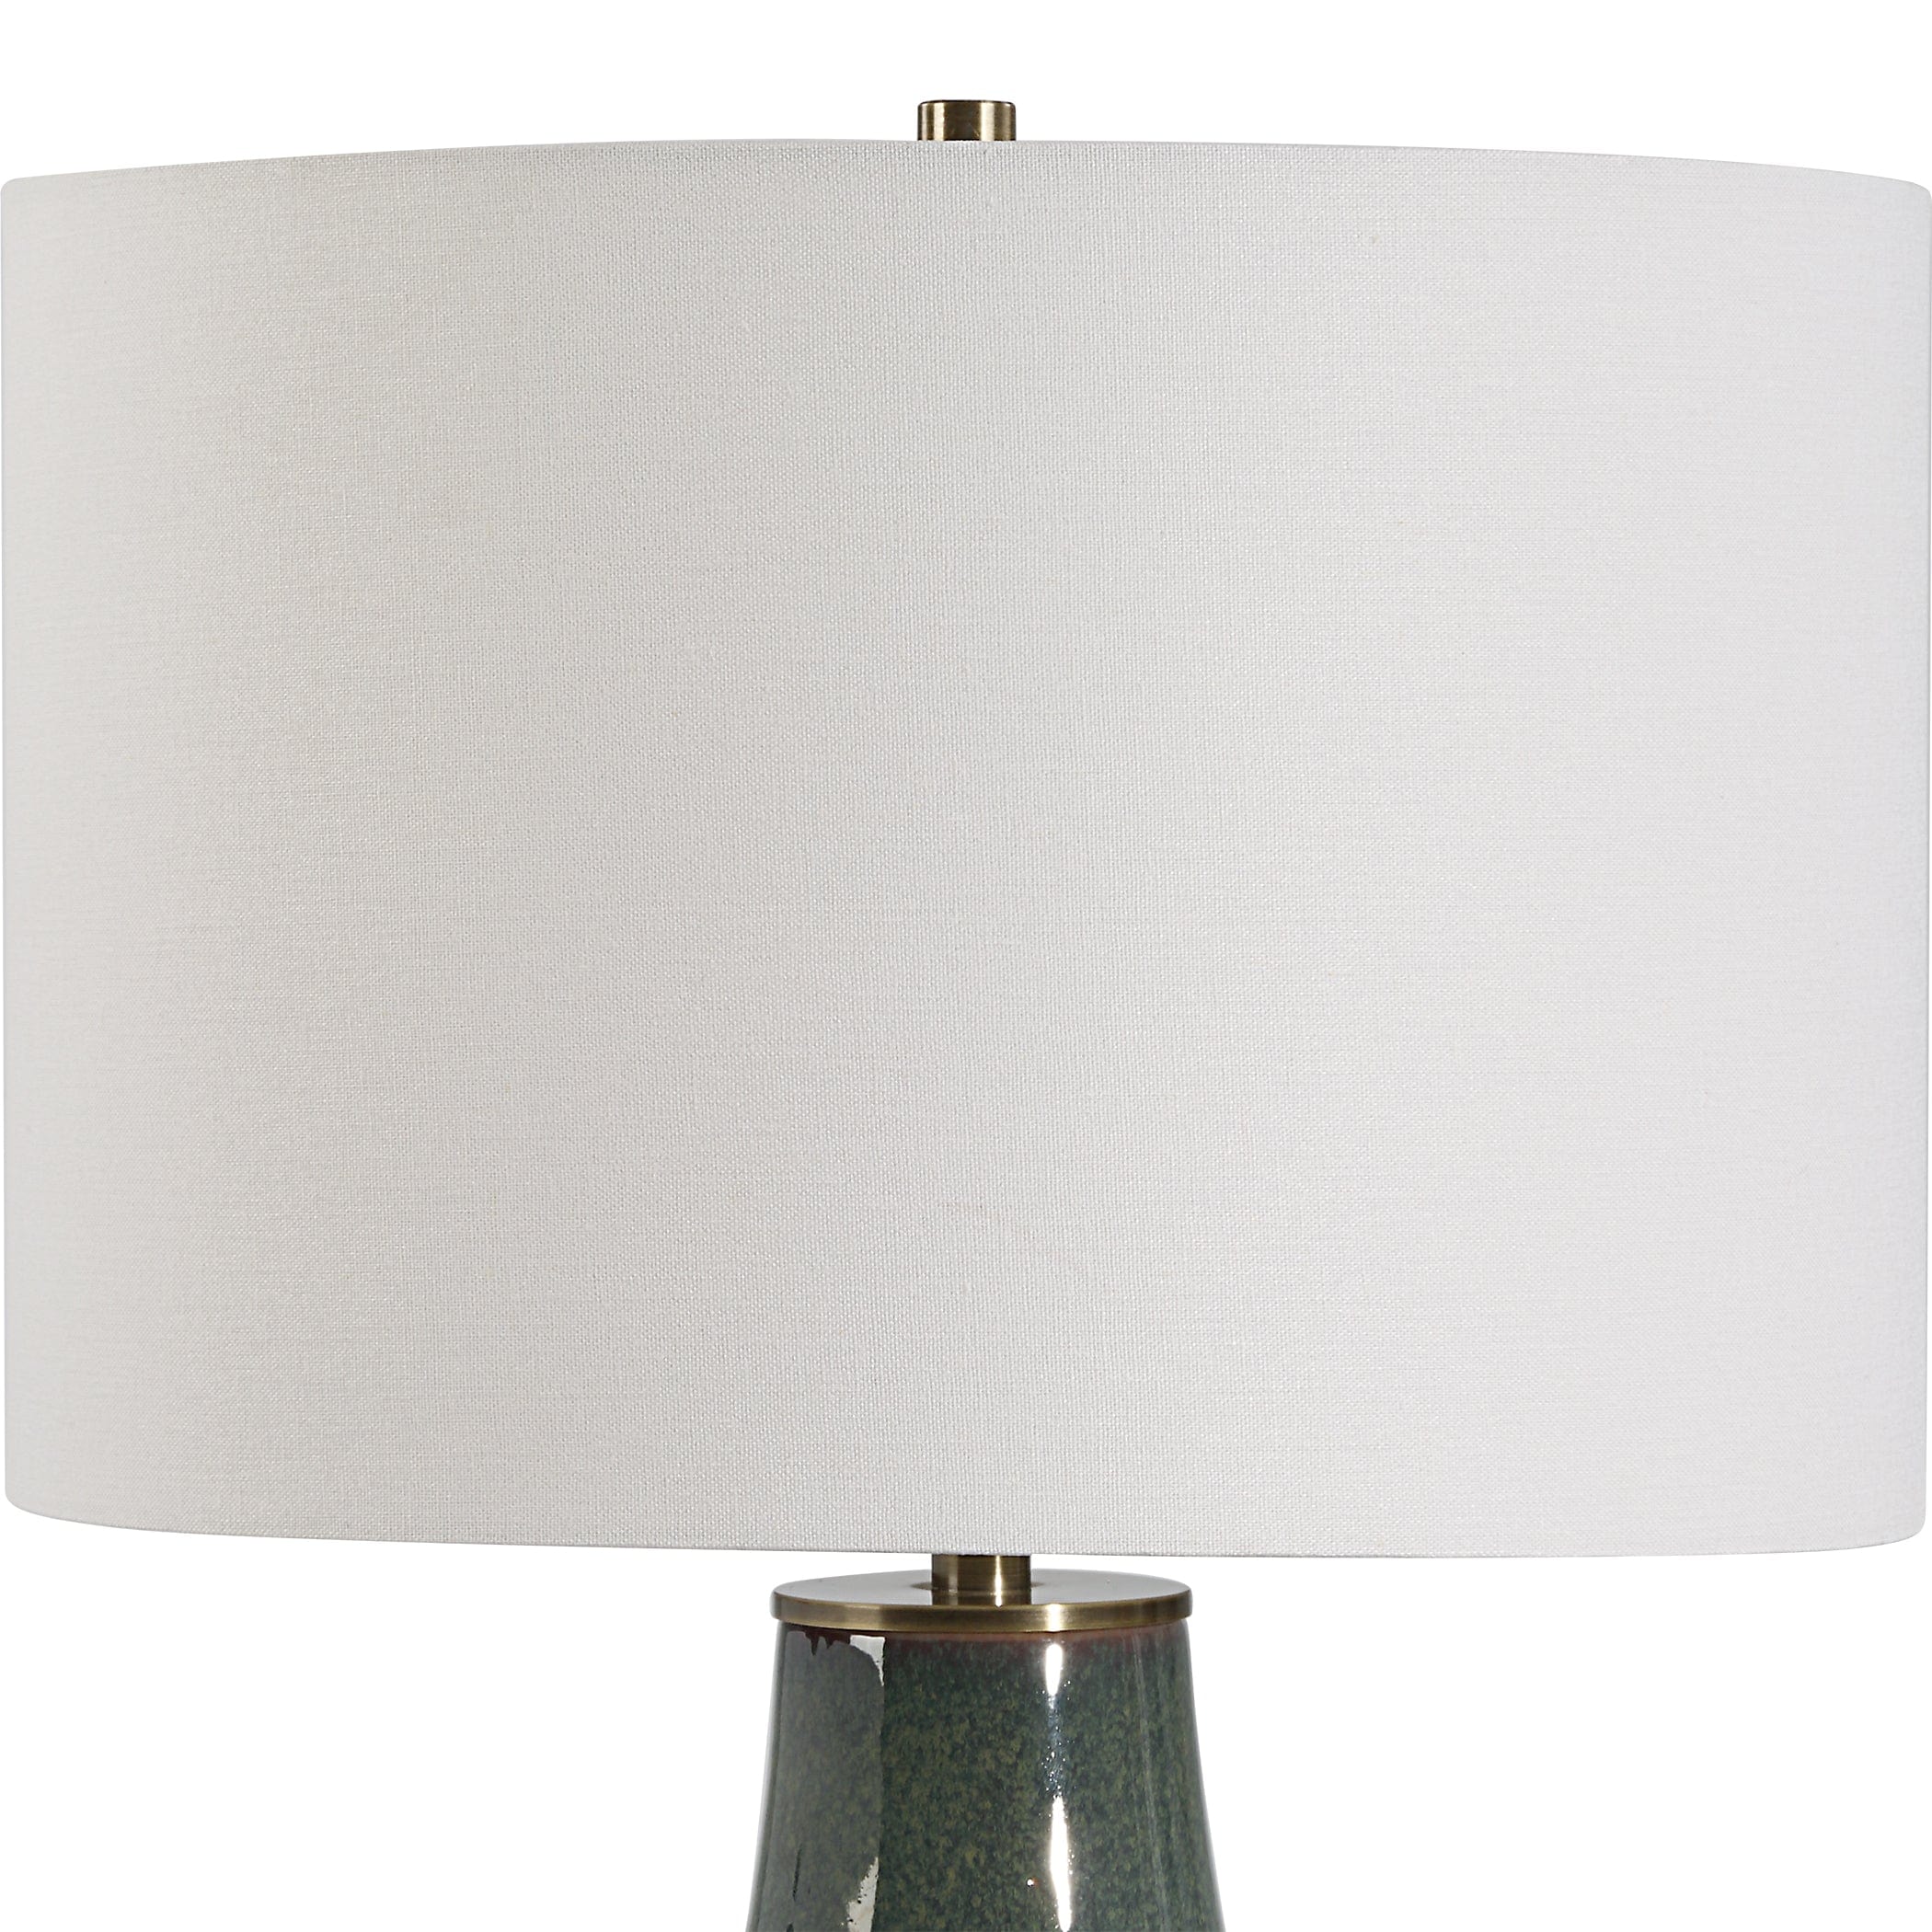 TABLE LAMP WL-16 Uttermost